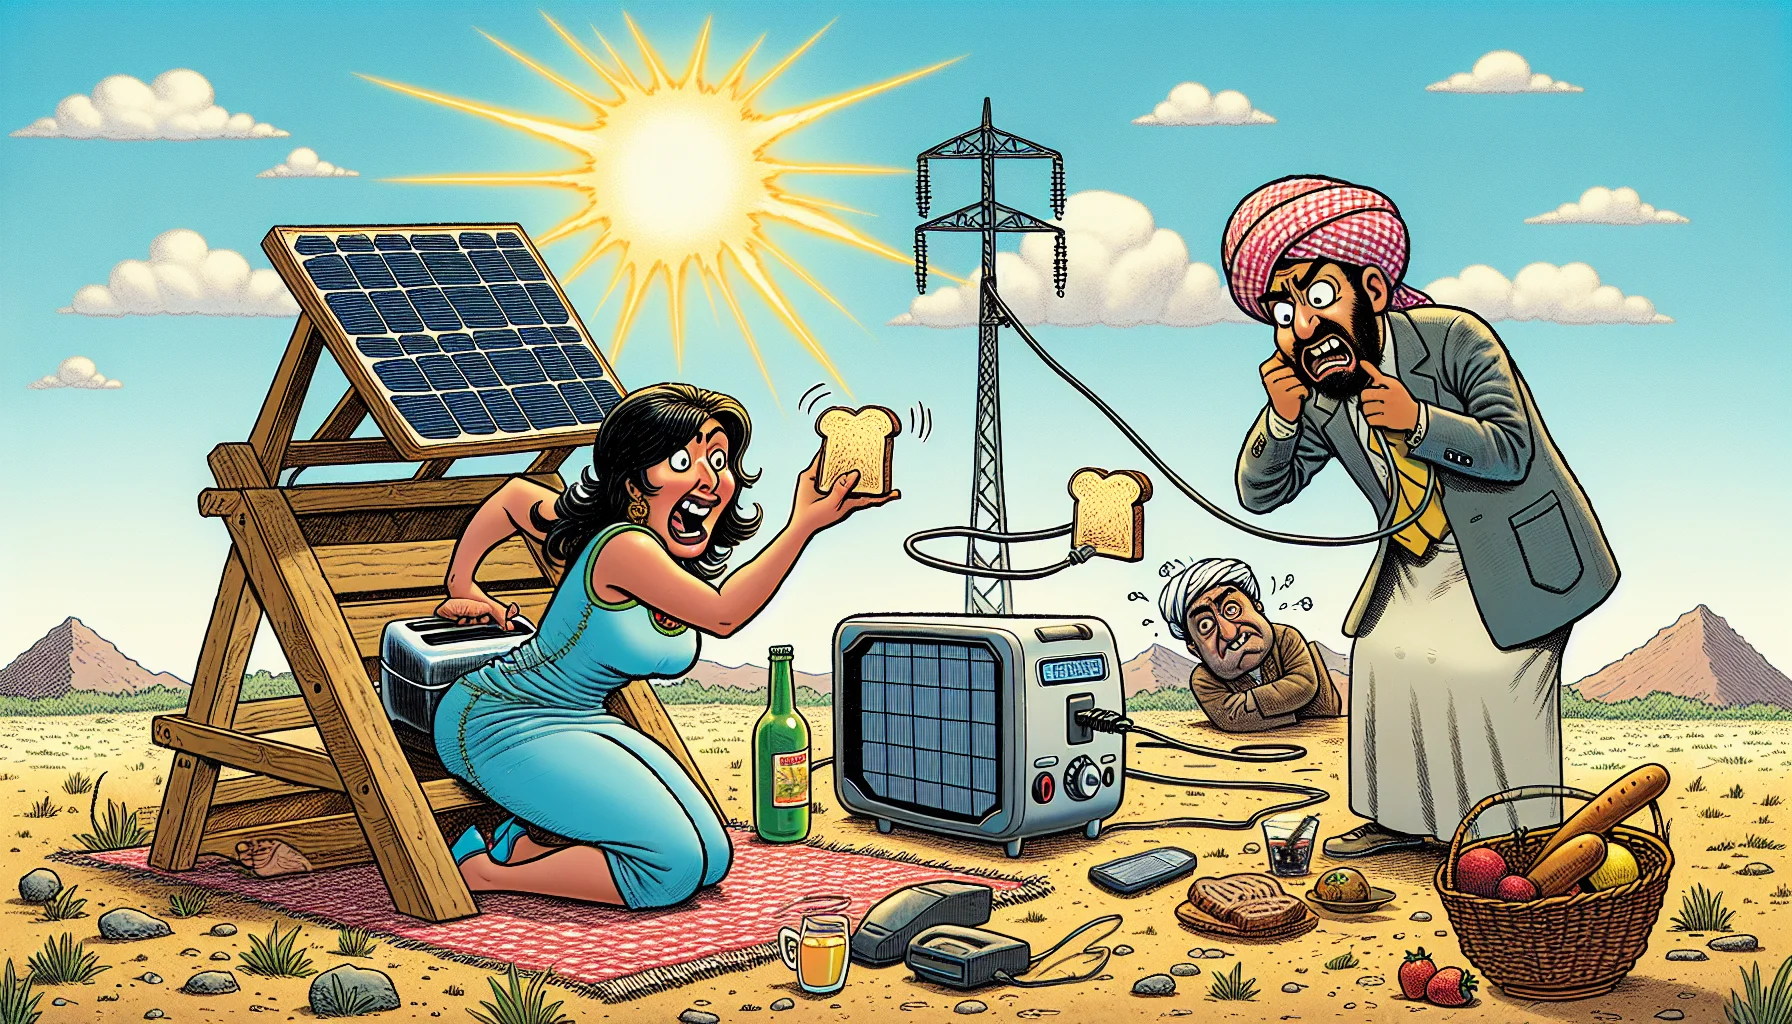 Illustrate a comedic situation involving the best portable solar generator. Set in an outdoorsy environment, a lady with Hispanic descent is trying to toast bread using a toaster plugged into the solar generator. Nearby, a Middle-Eastern man is perplexedly trying to power up a large, old-fashioned television set outside. The overall atmosphere should be playful, highlighting the point that with the portable solar generator, they are able to generate electricity anywhere in a whimsical manner. Add details like bright sunlight, the generator enthusiastically gleaming, and lighthearted expressions on the people's faces to add to the humor.